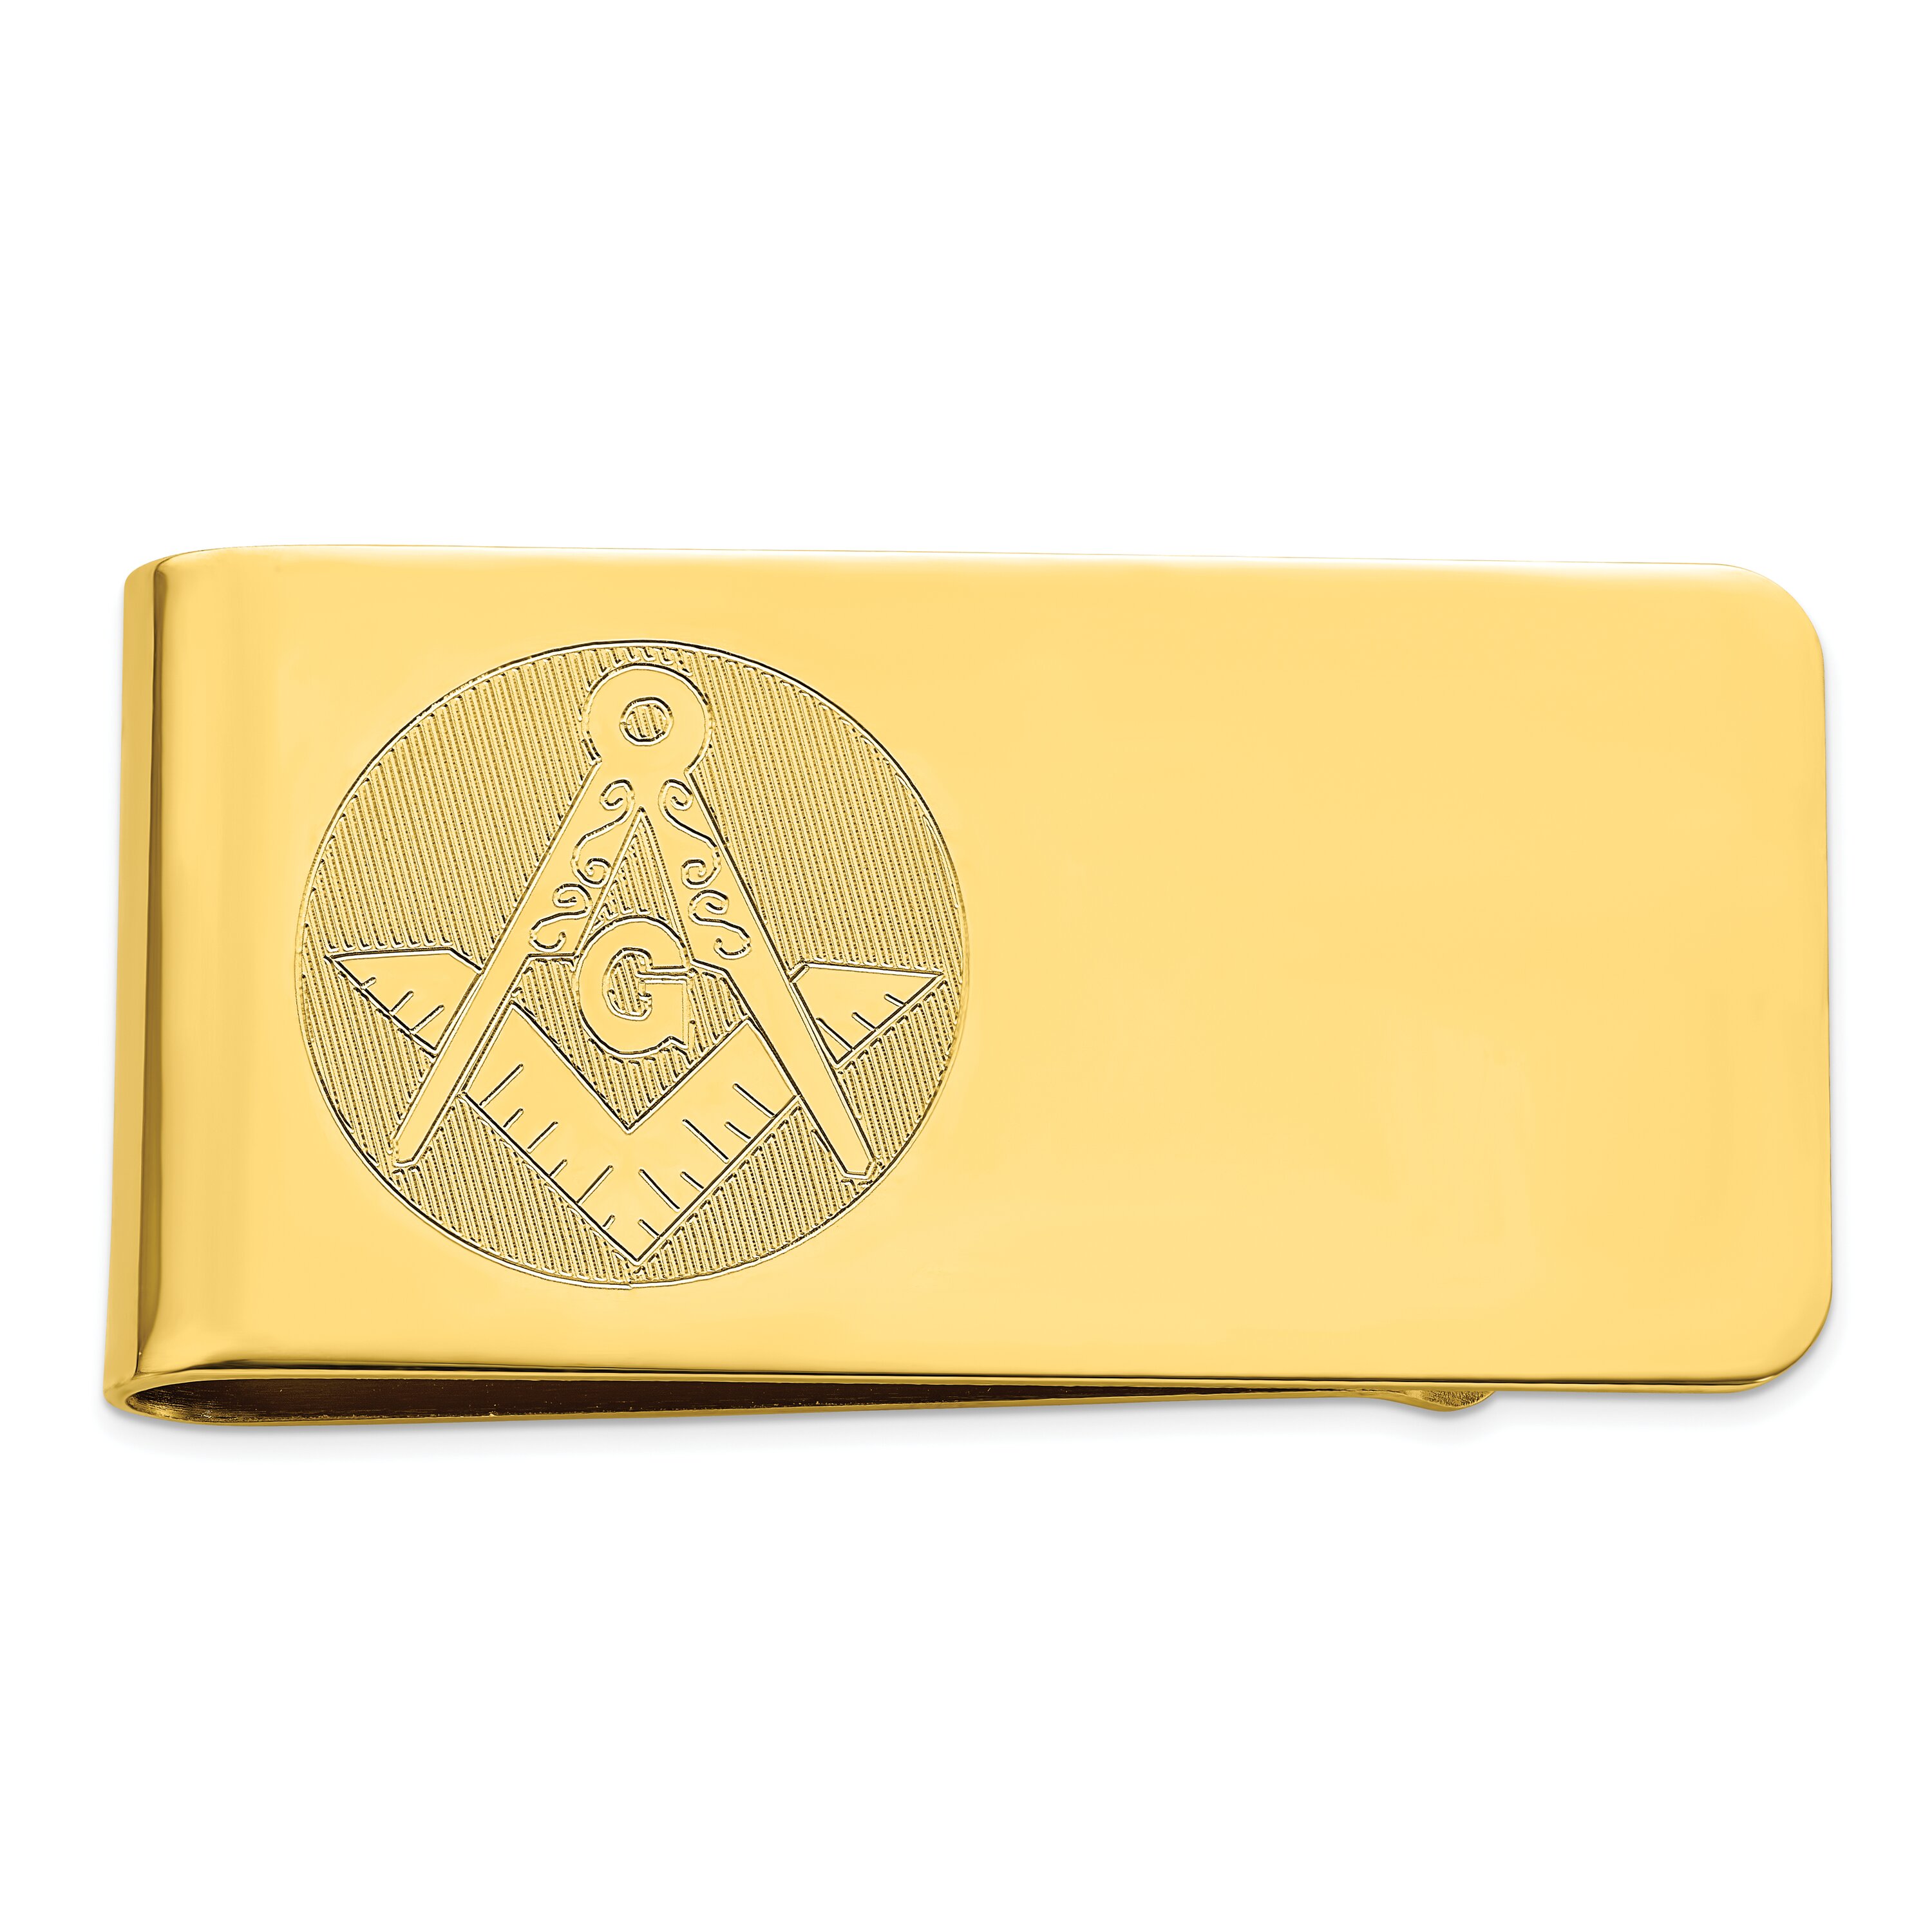 Findingking Gold Plated Rectangle Money Clip